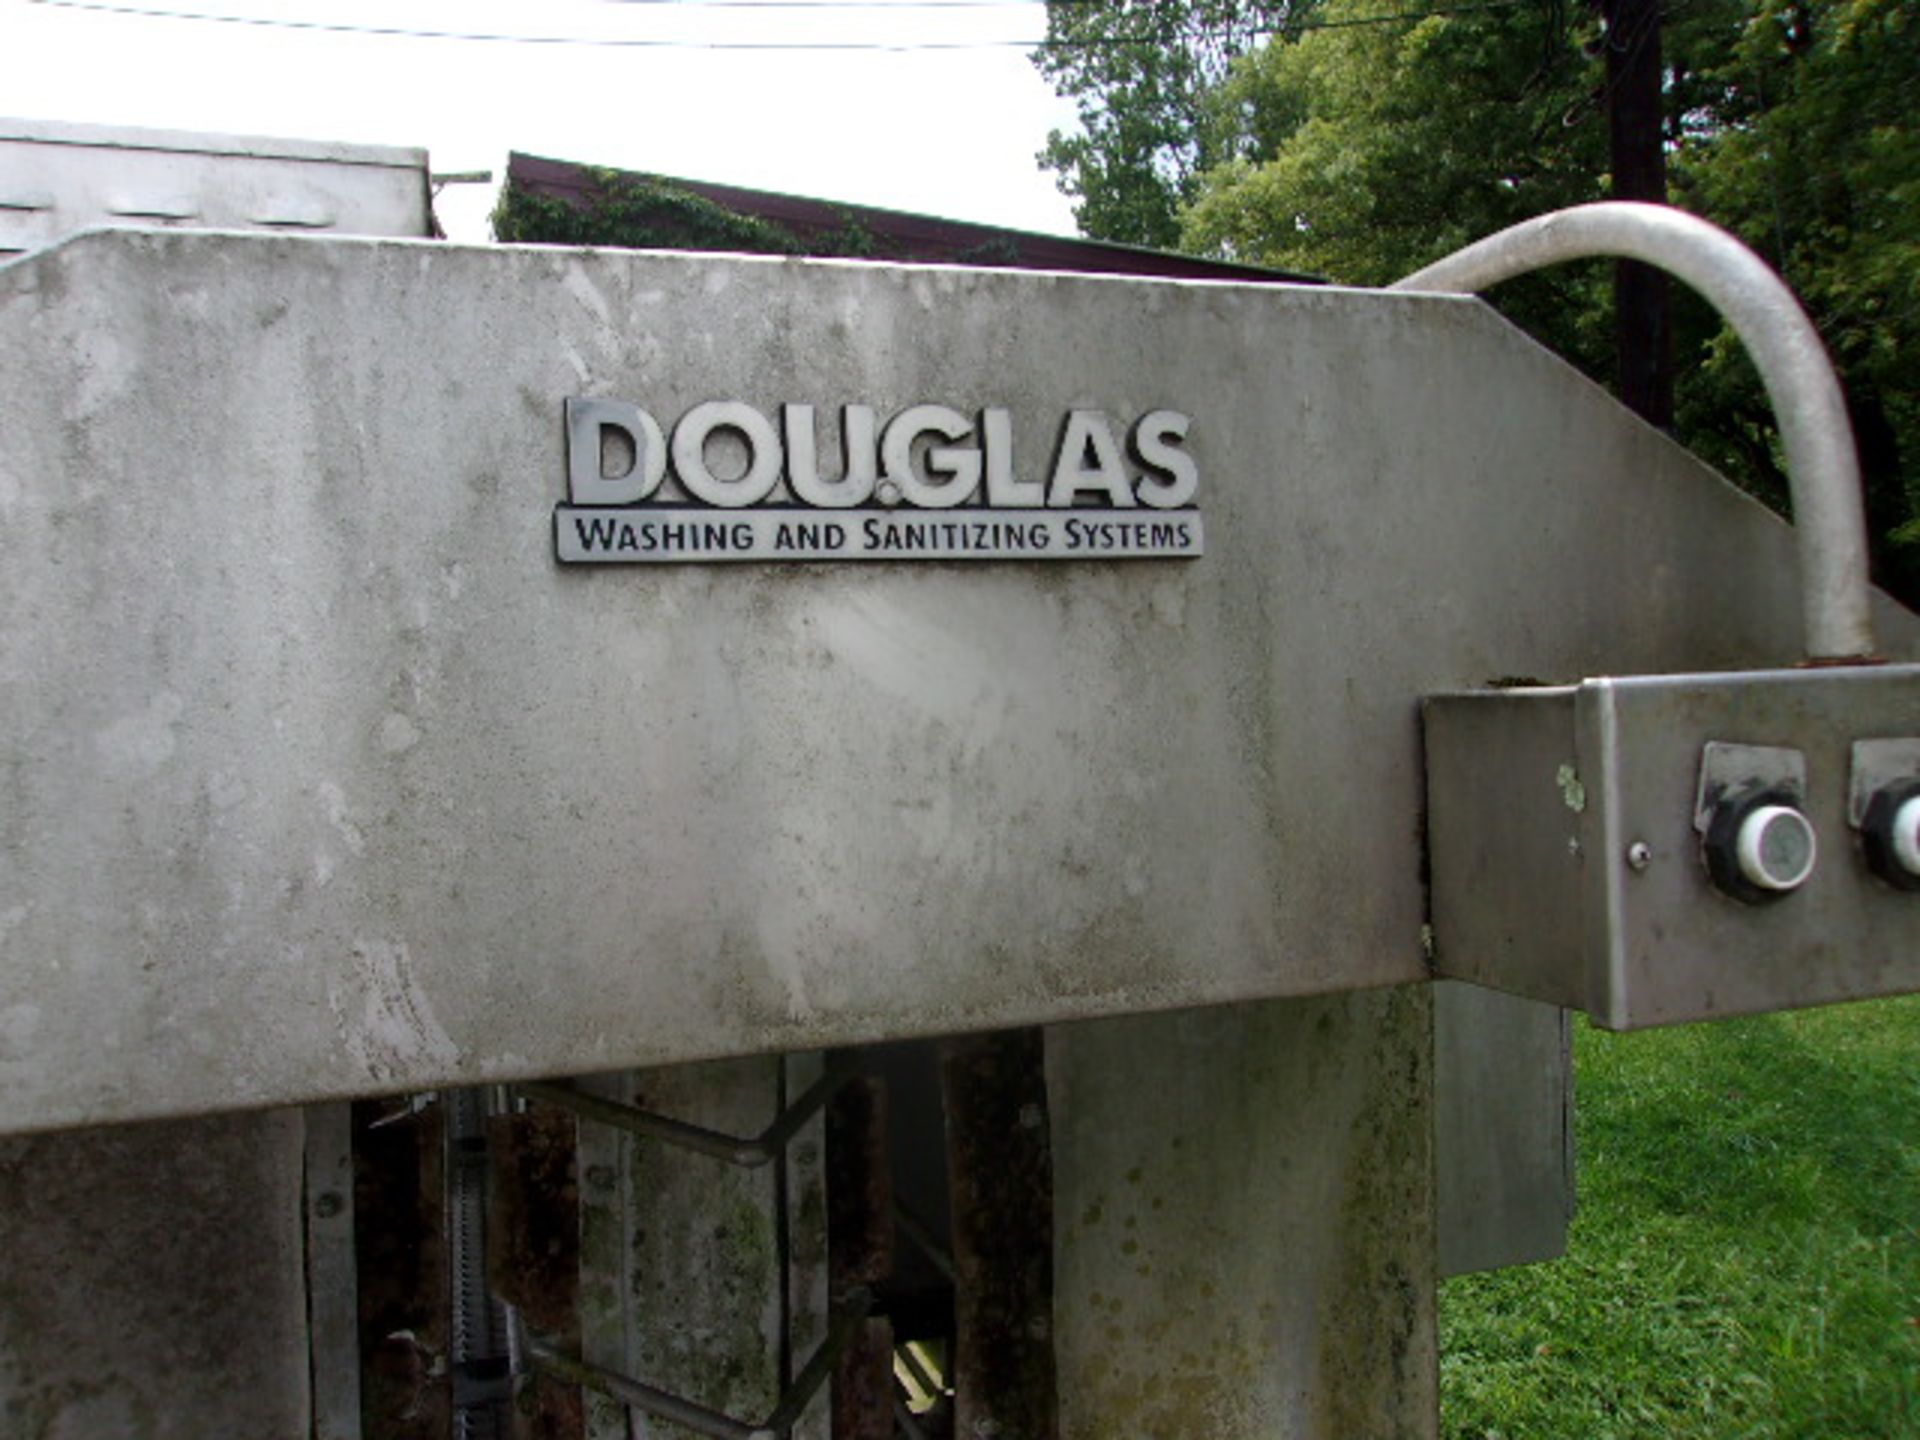 Douglas Tray Washer(Located Glouster, OH) Athens County - Image 2 of 6